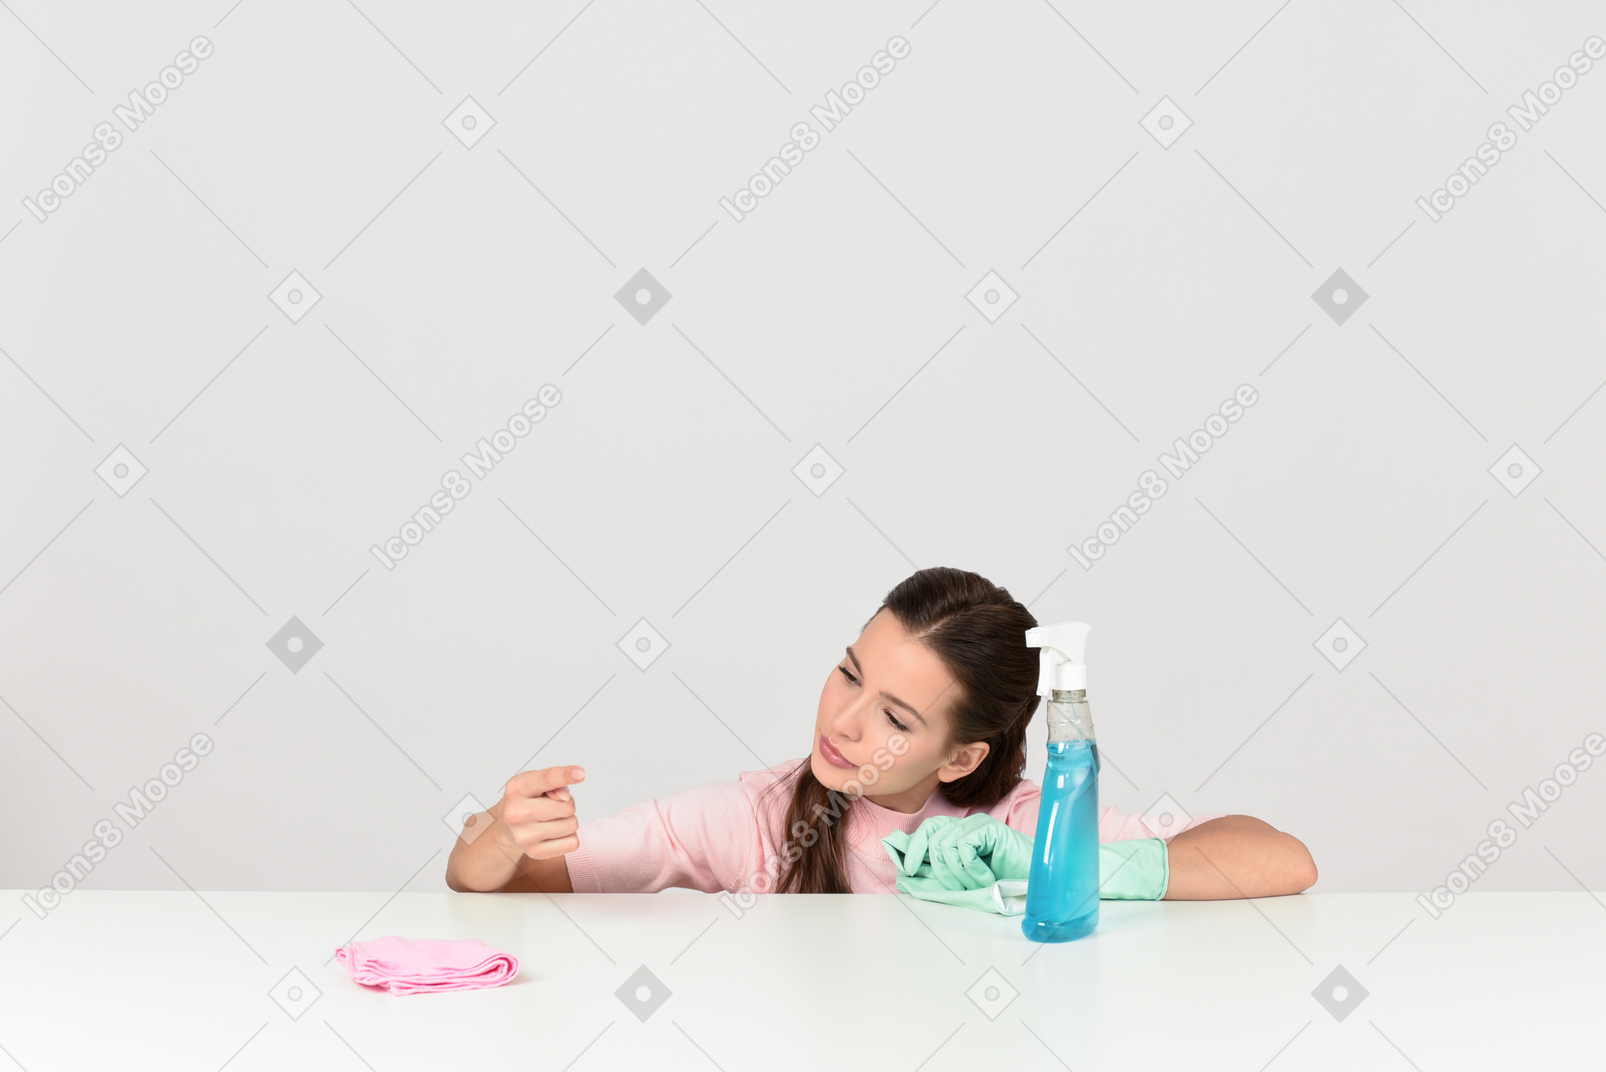 Attractive young woman dusting a surface